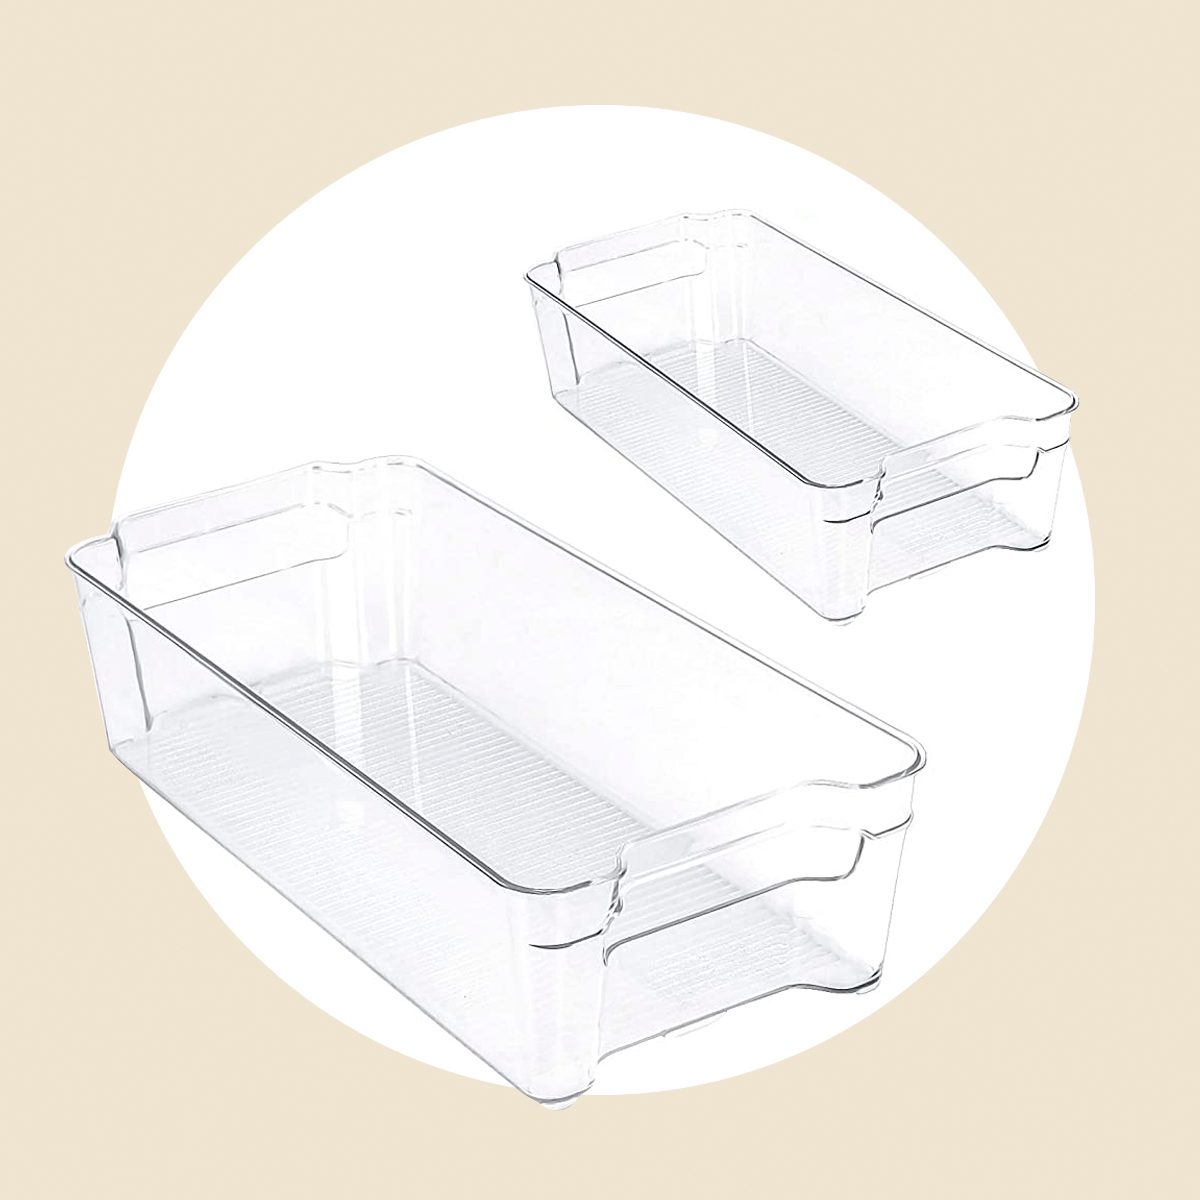 Hudson Home Clear Plastic Organizers, 4-Pack